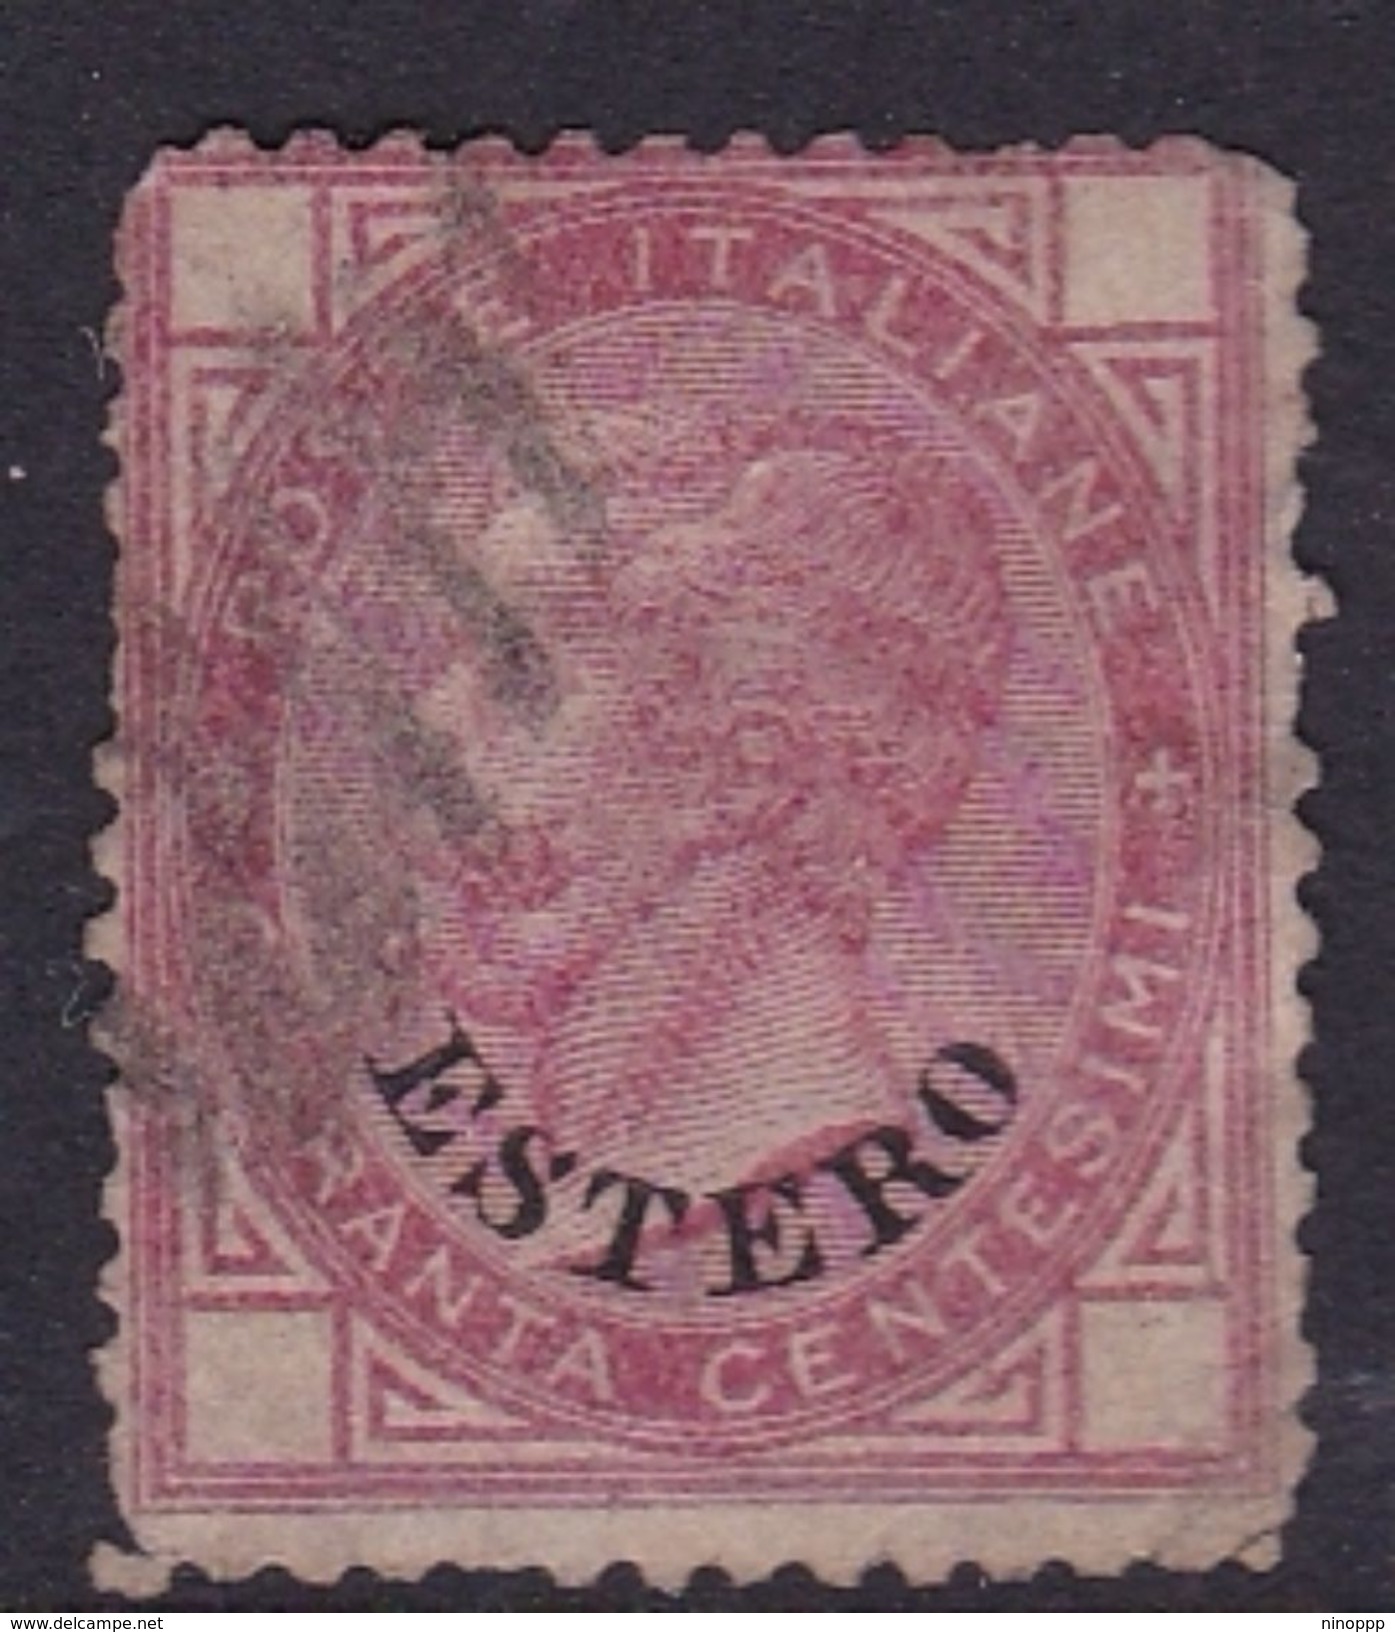 Italy-Italian Offices Abroad-General Issues- S7 1874  40c Rose, Used - Emisiones Generales